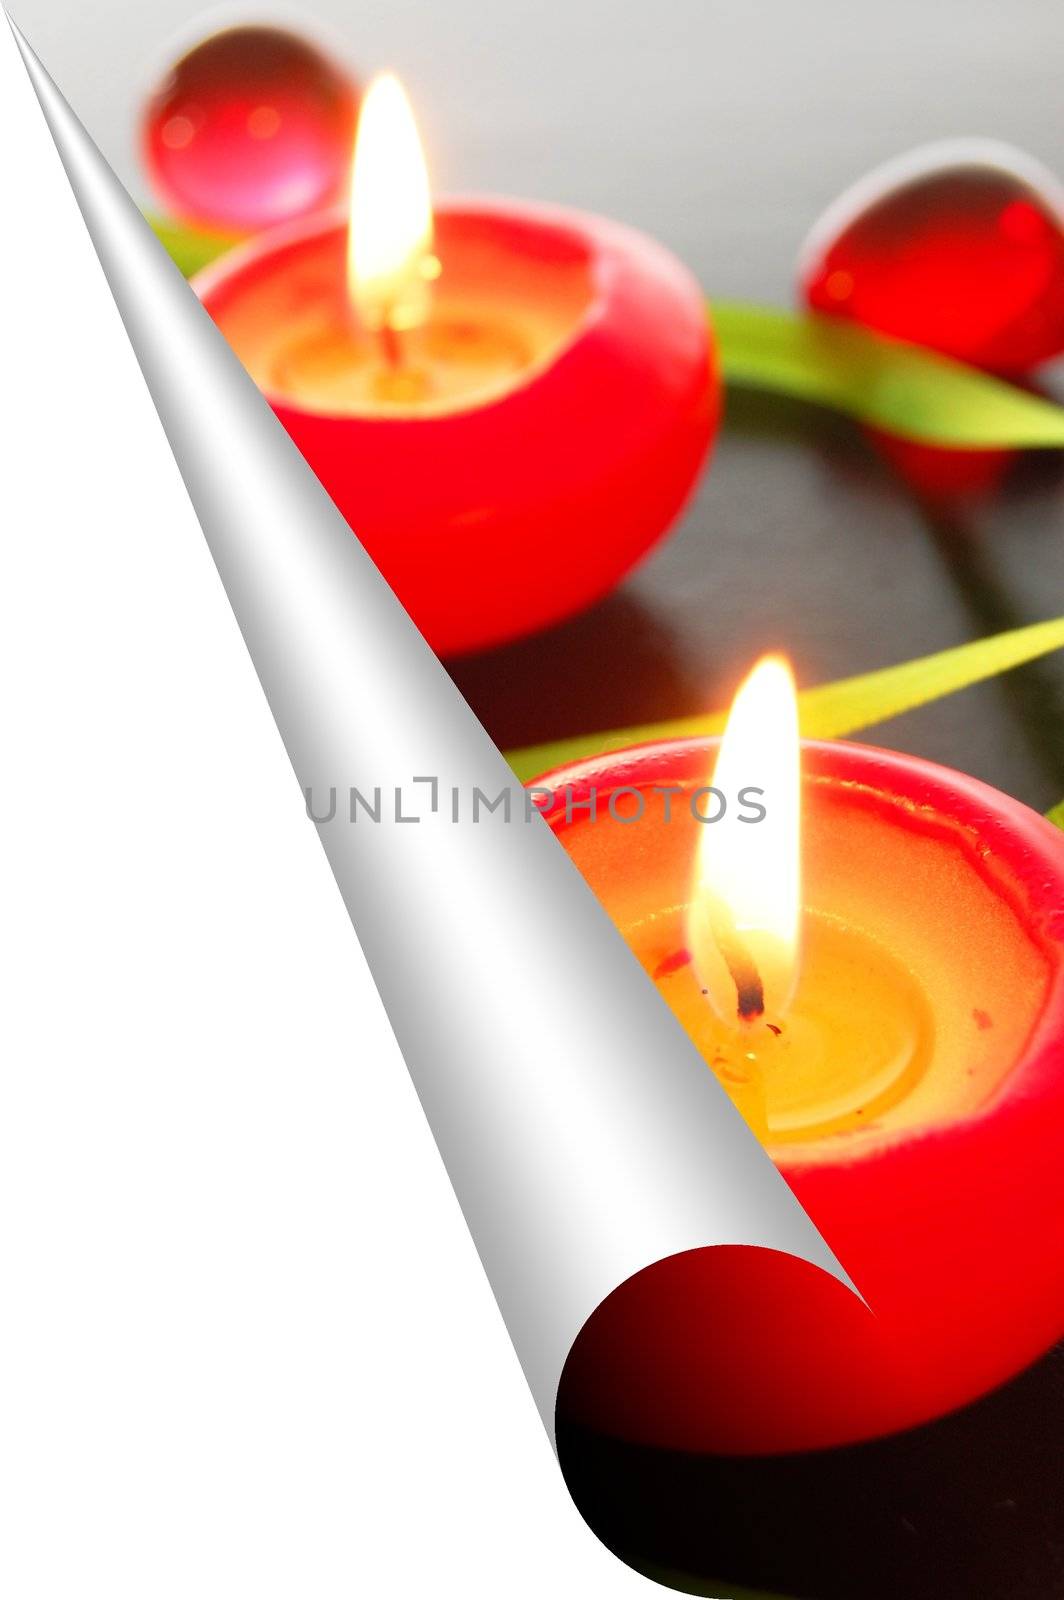 spa candle or zen image with copyspace for your text message